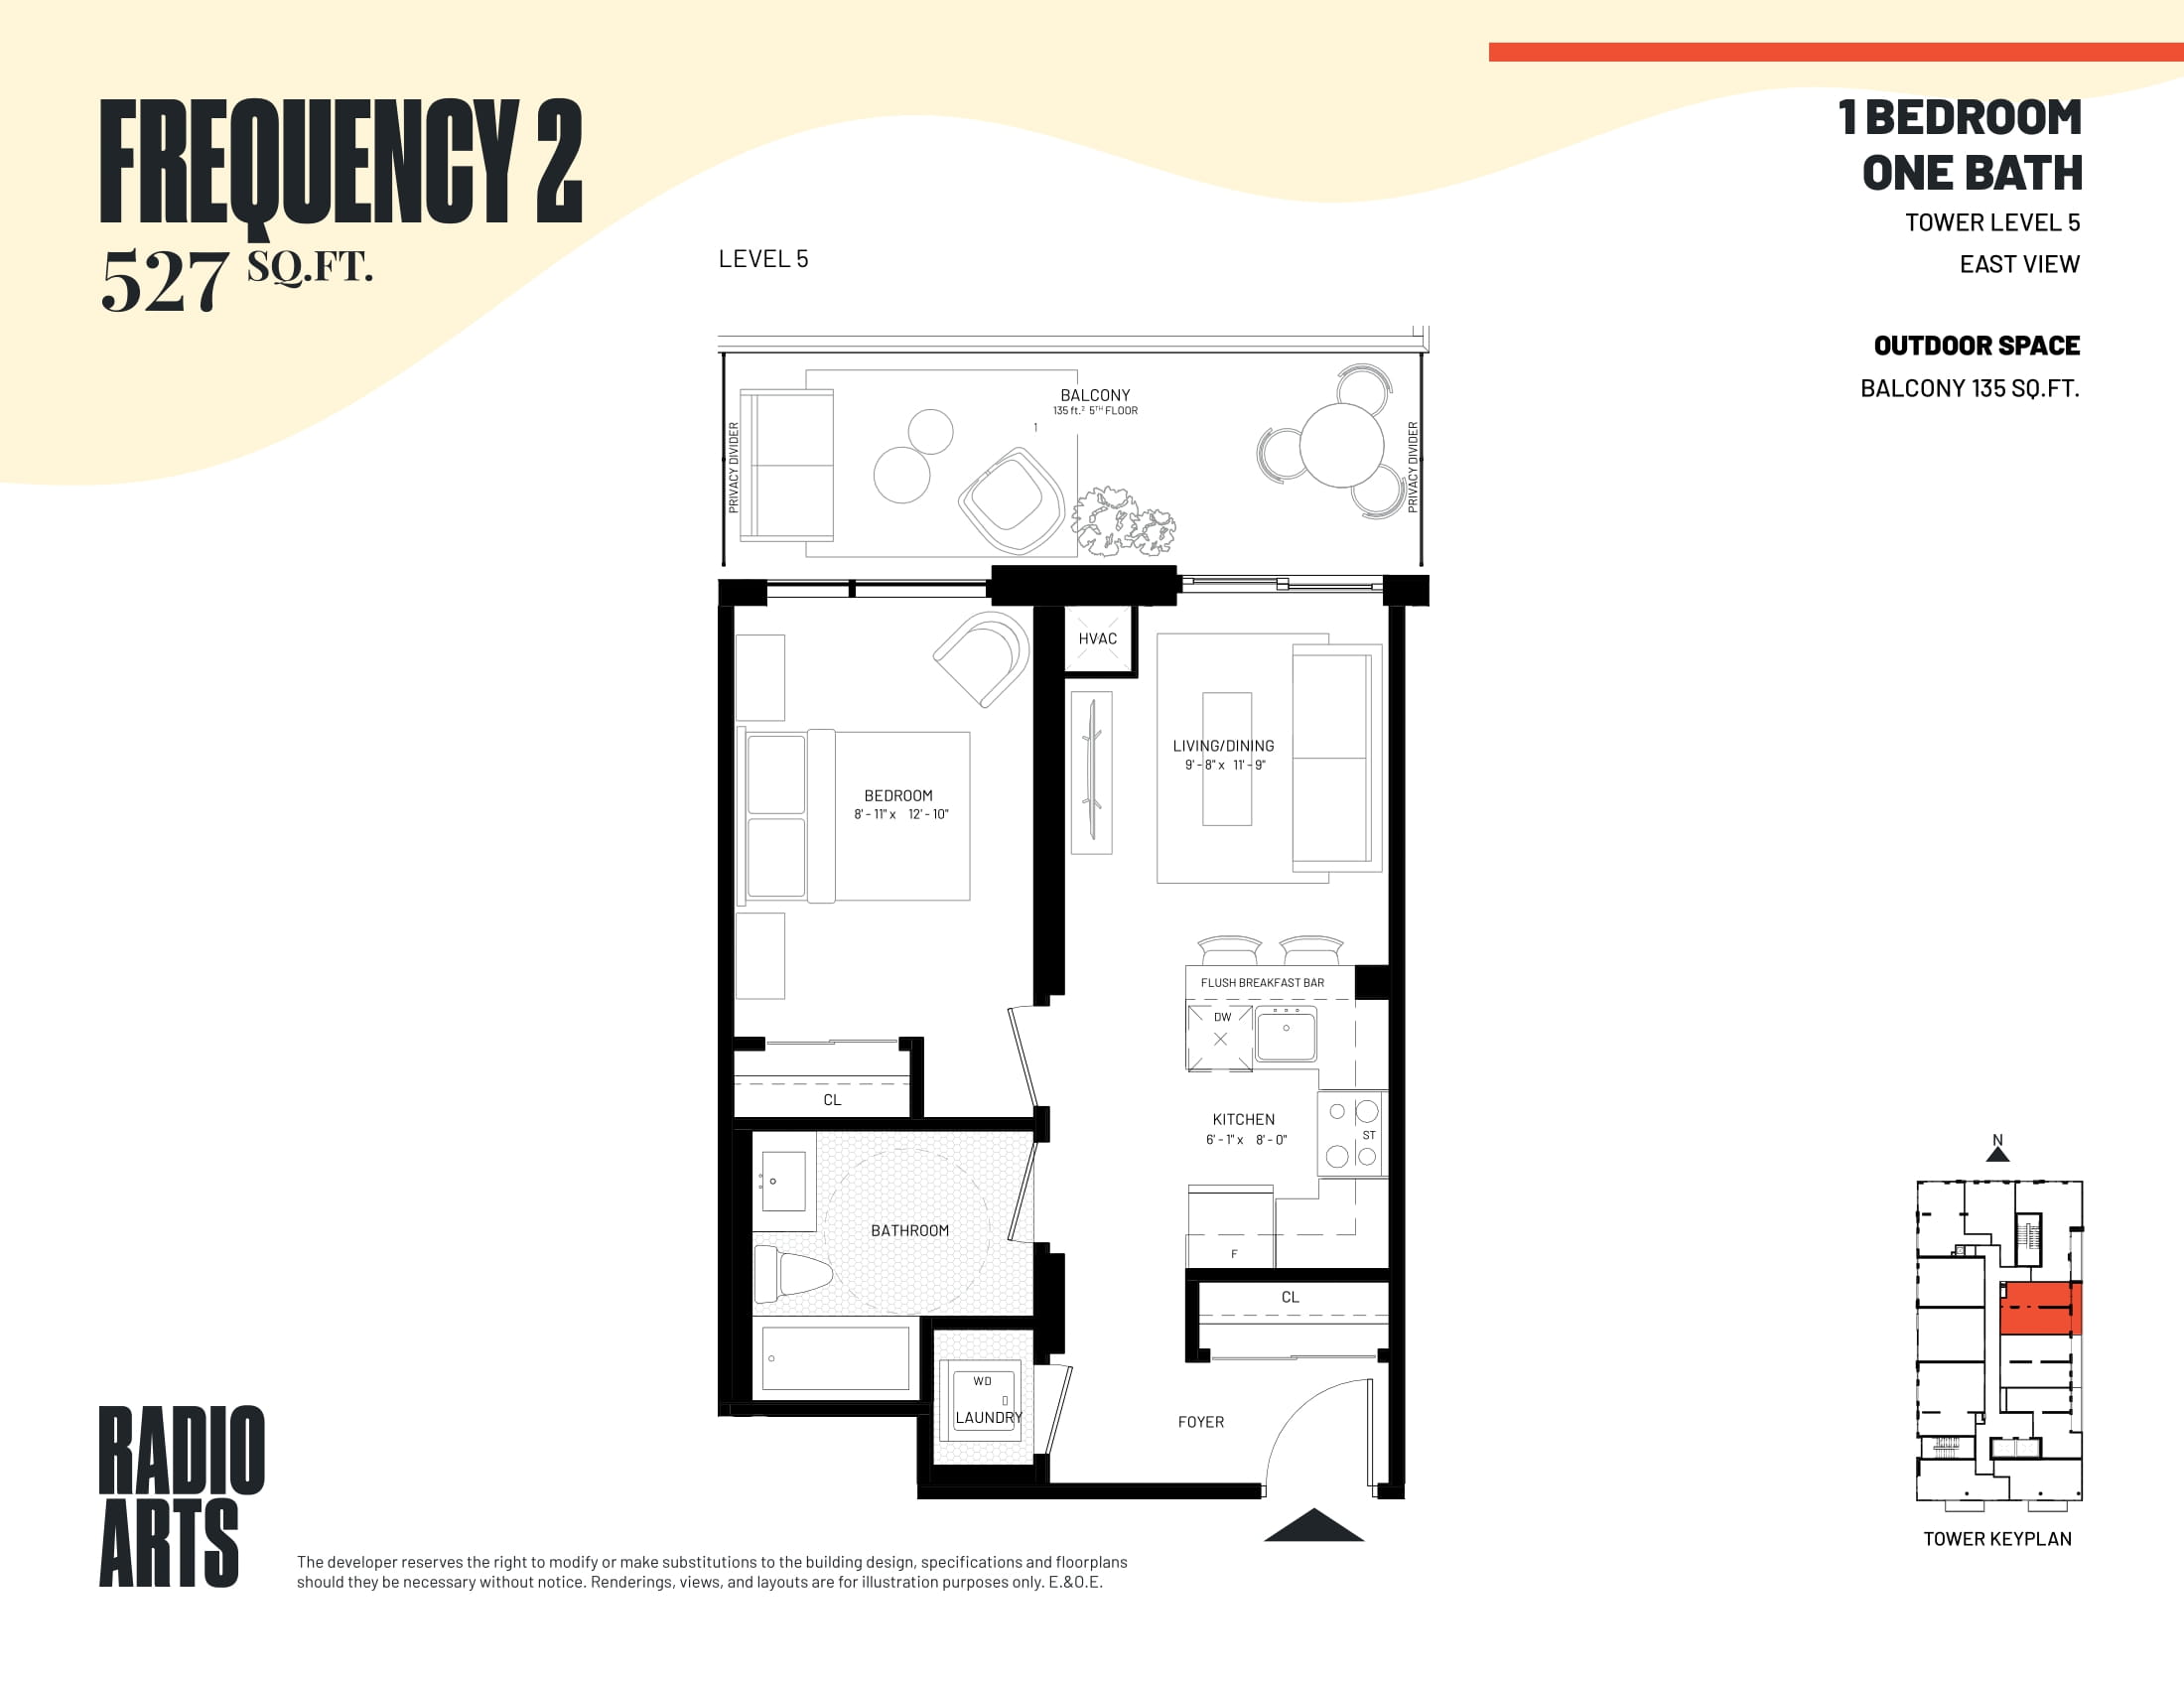  Floor Plan of Radio Arts with undefined beds